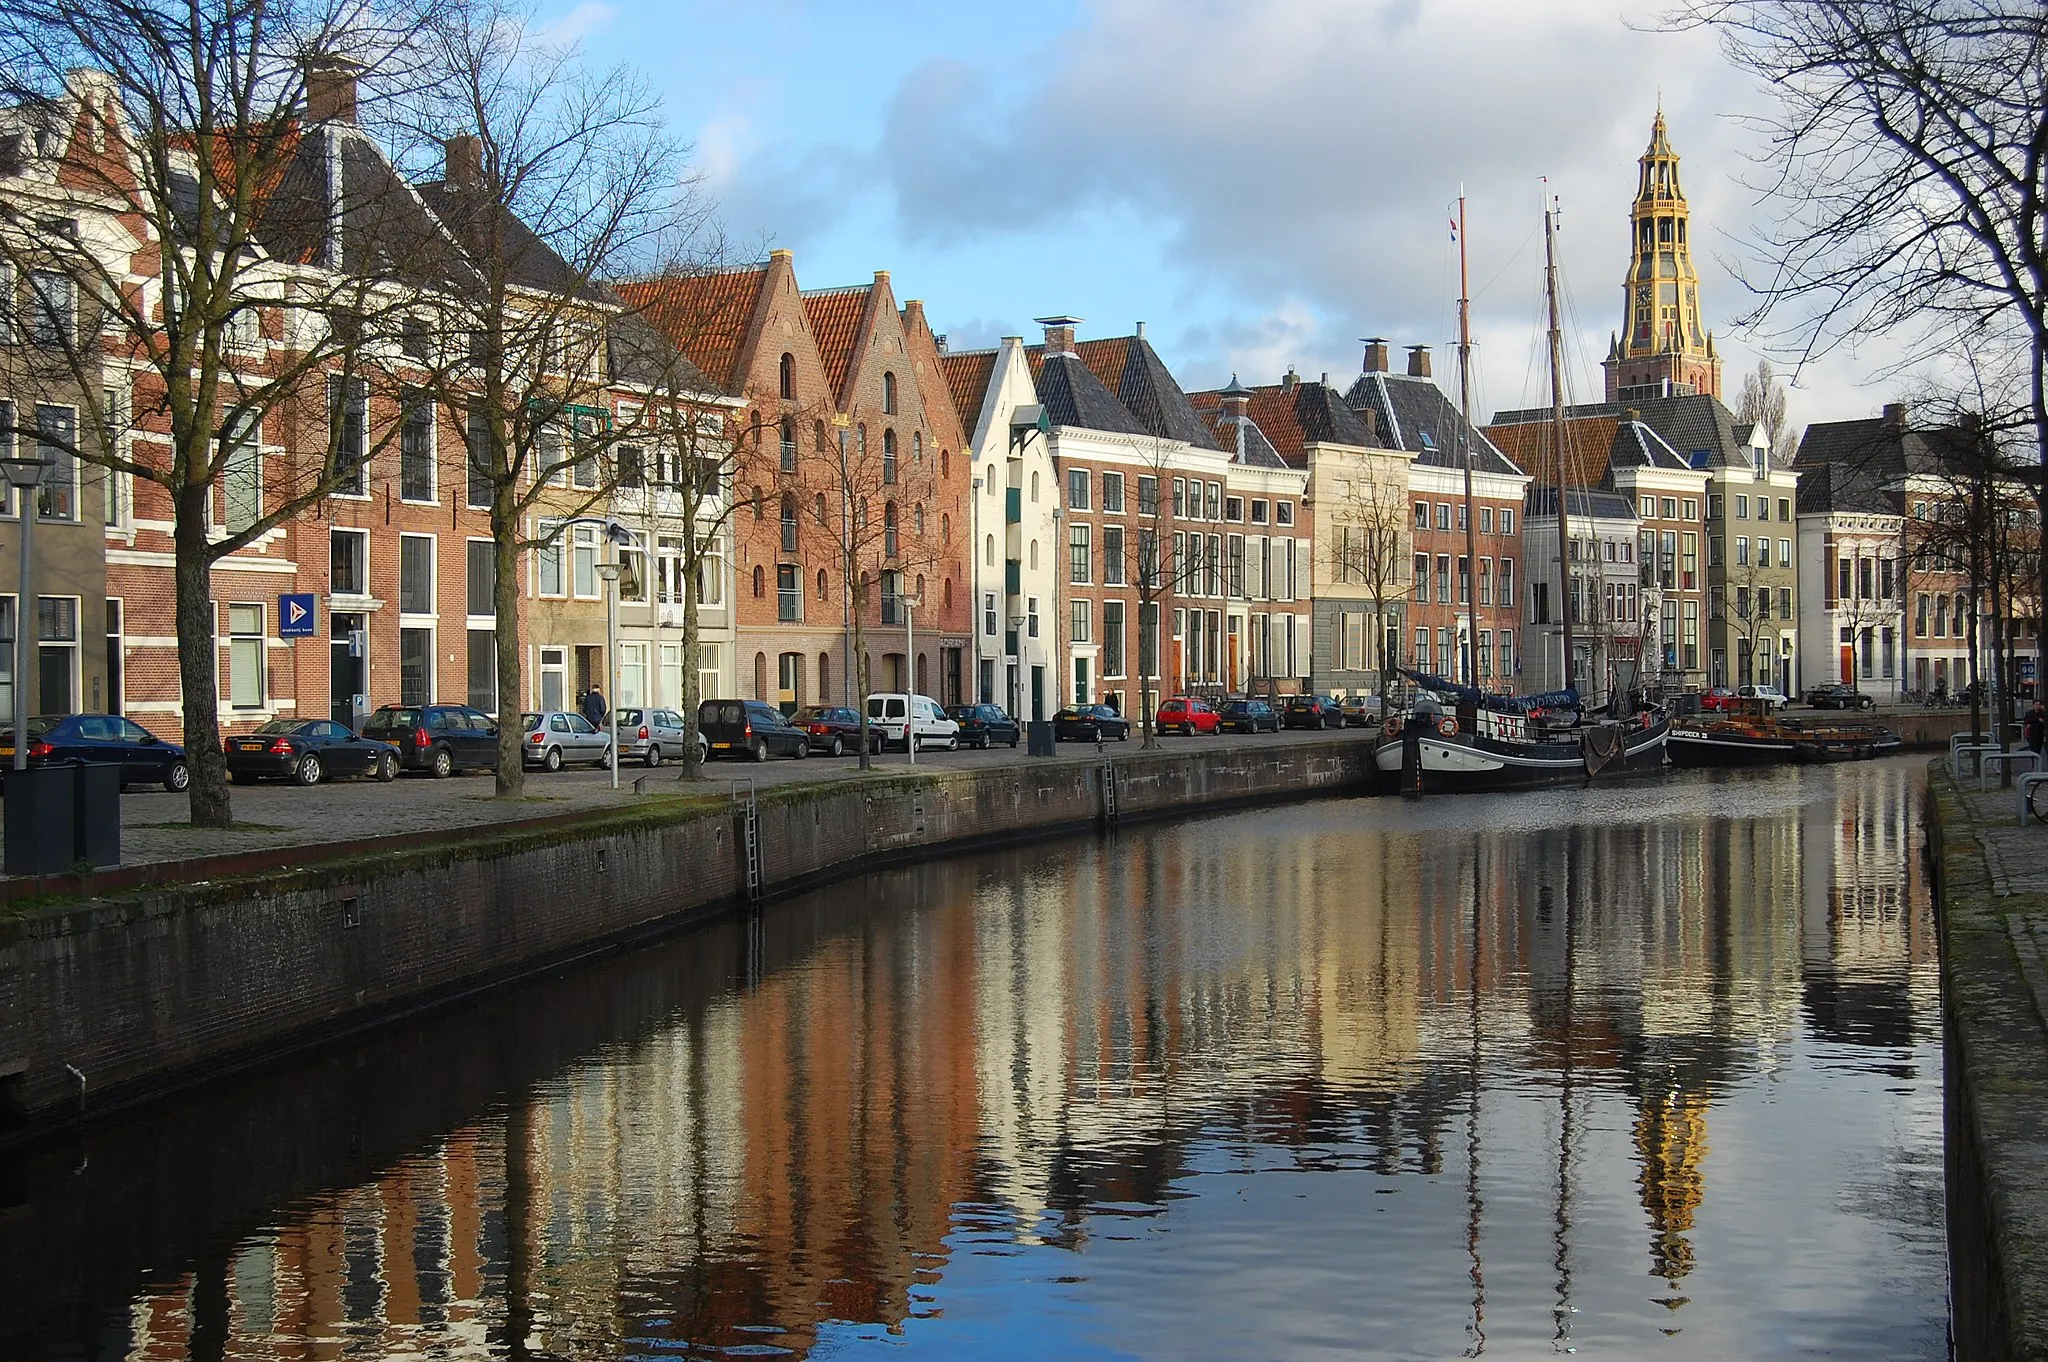 Photo showing: Old warehouses along the Hoge der Aa canal in the city of Groningen, the Netherlands. In the background, the tower of the A-kerk (A-church) can be seen